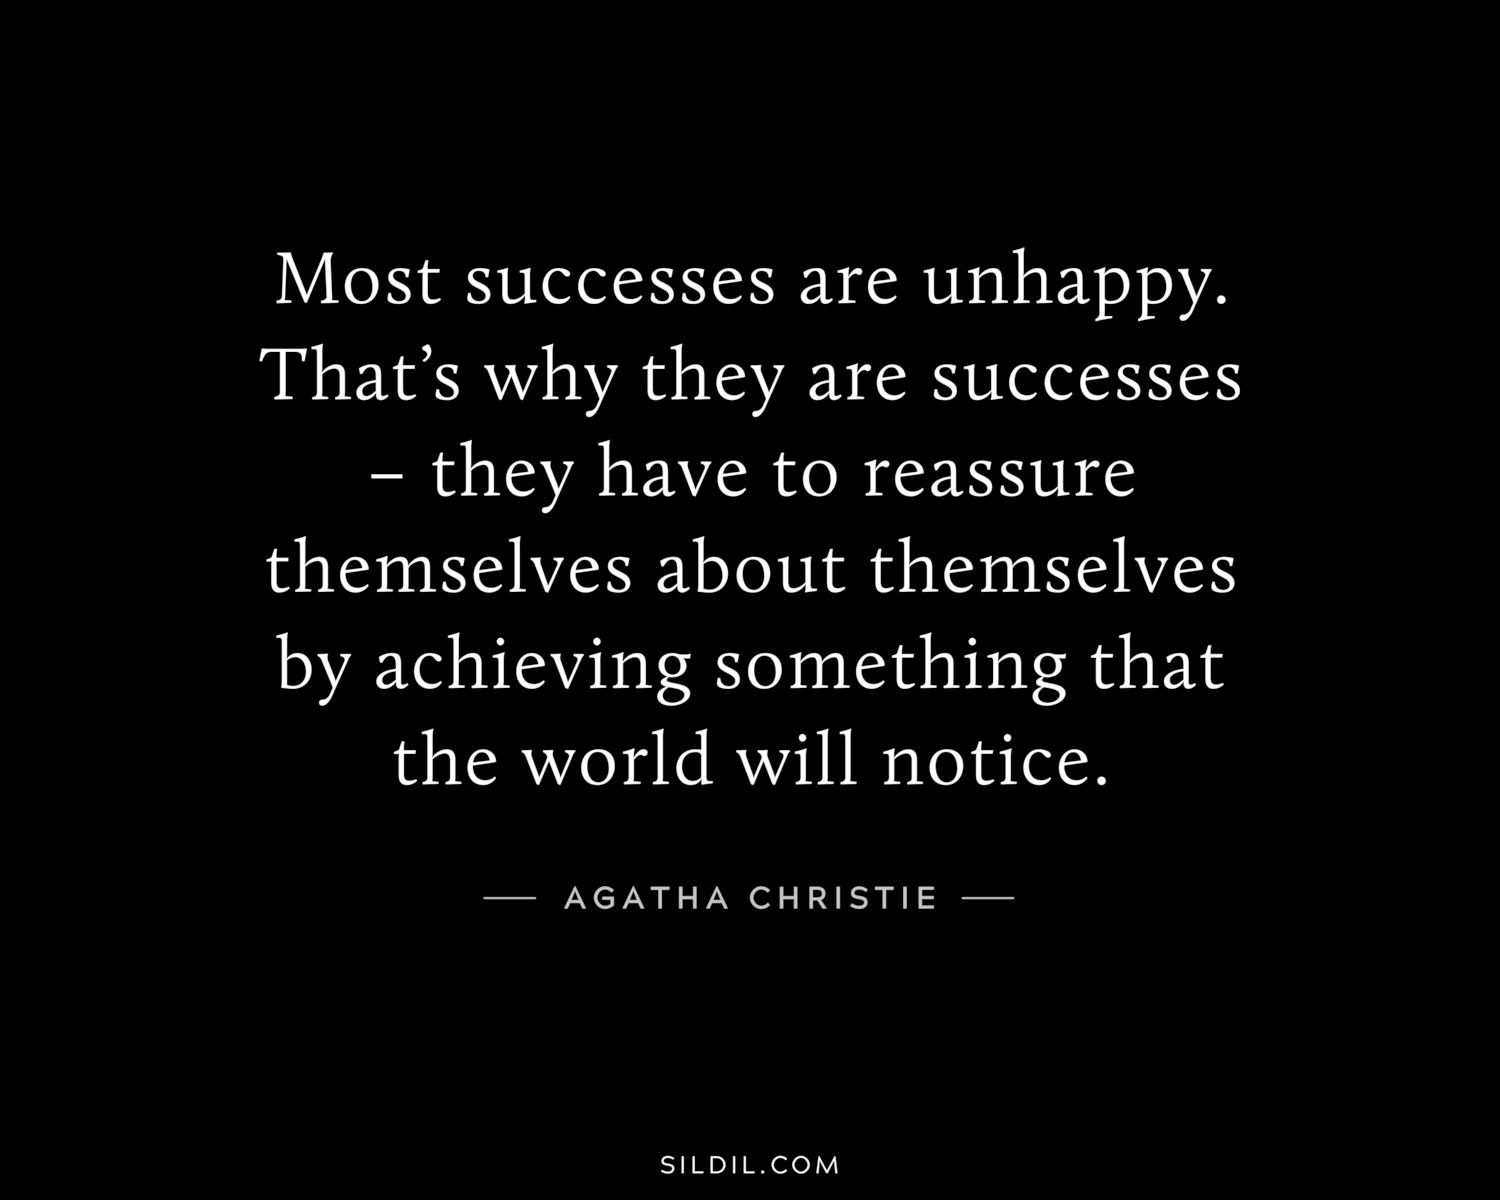 Most successes are unhappy. That’s why they are successes – they have to reassure themselves about themselves by achieving something that the world will notice.